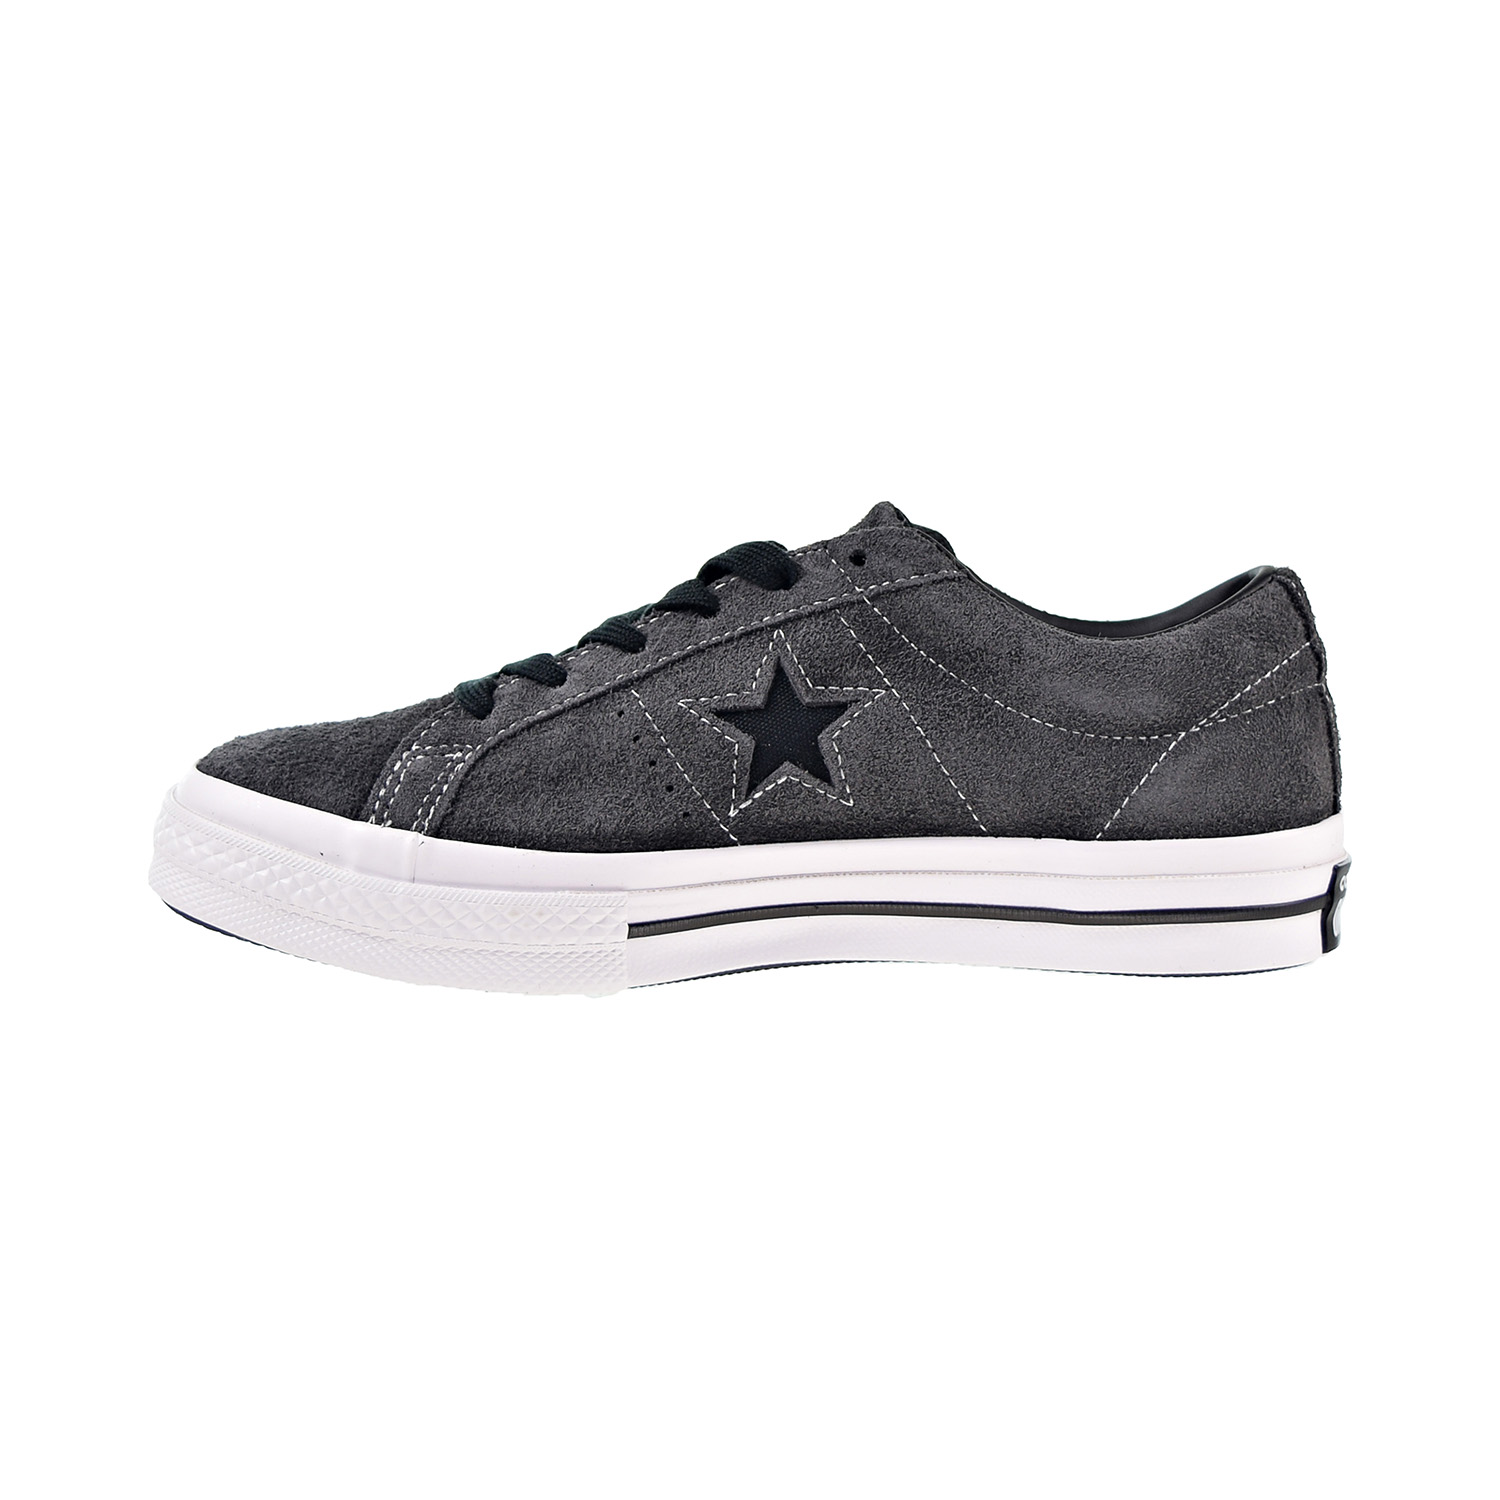 Converse One Star Ox Men's Shoes Almost Black-Black-White 163247c - image 4 of 6